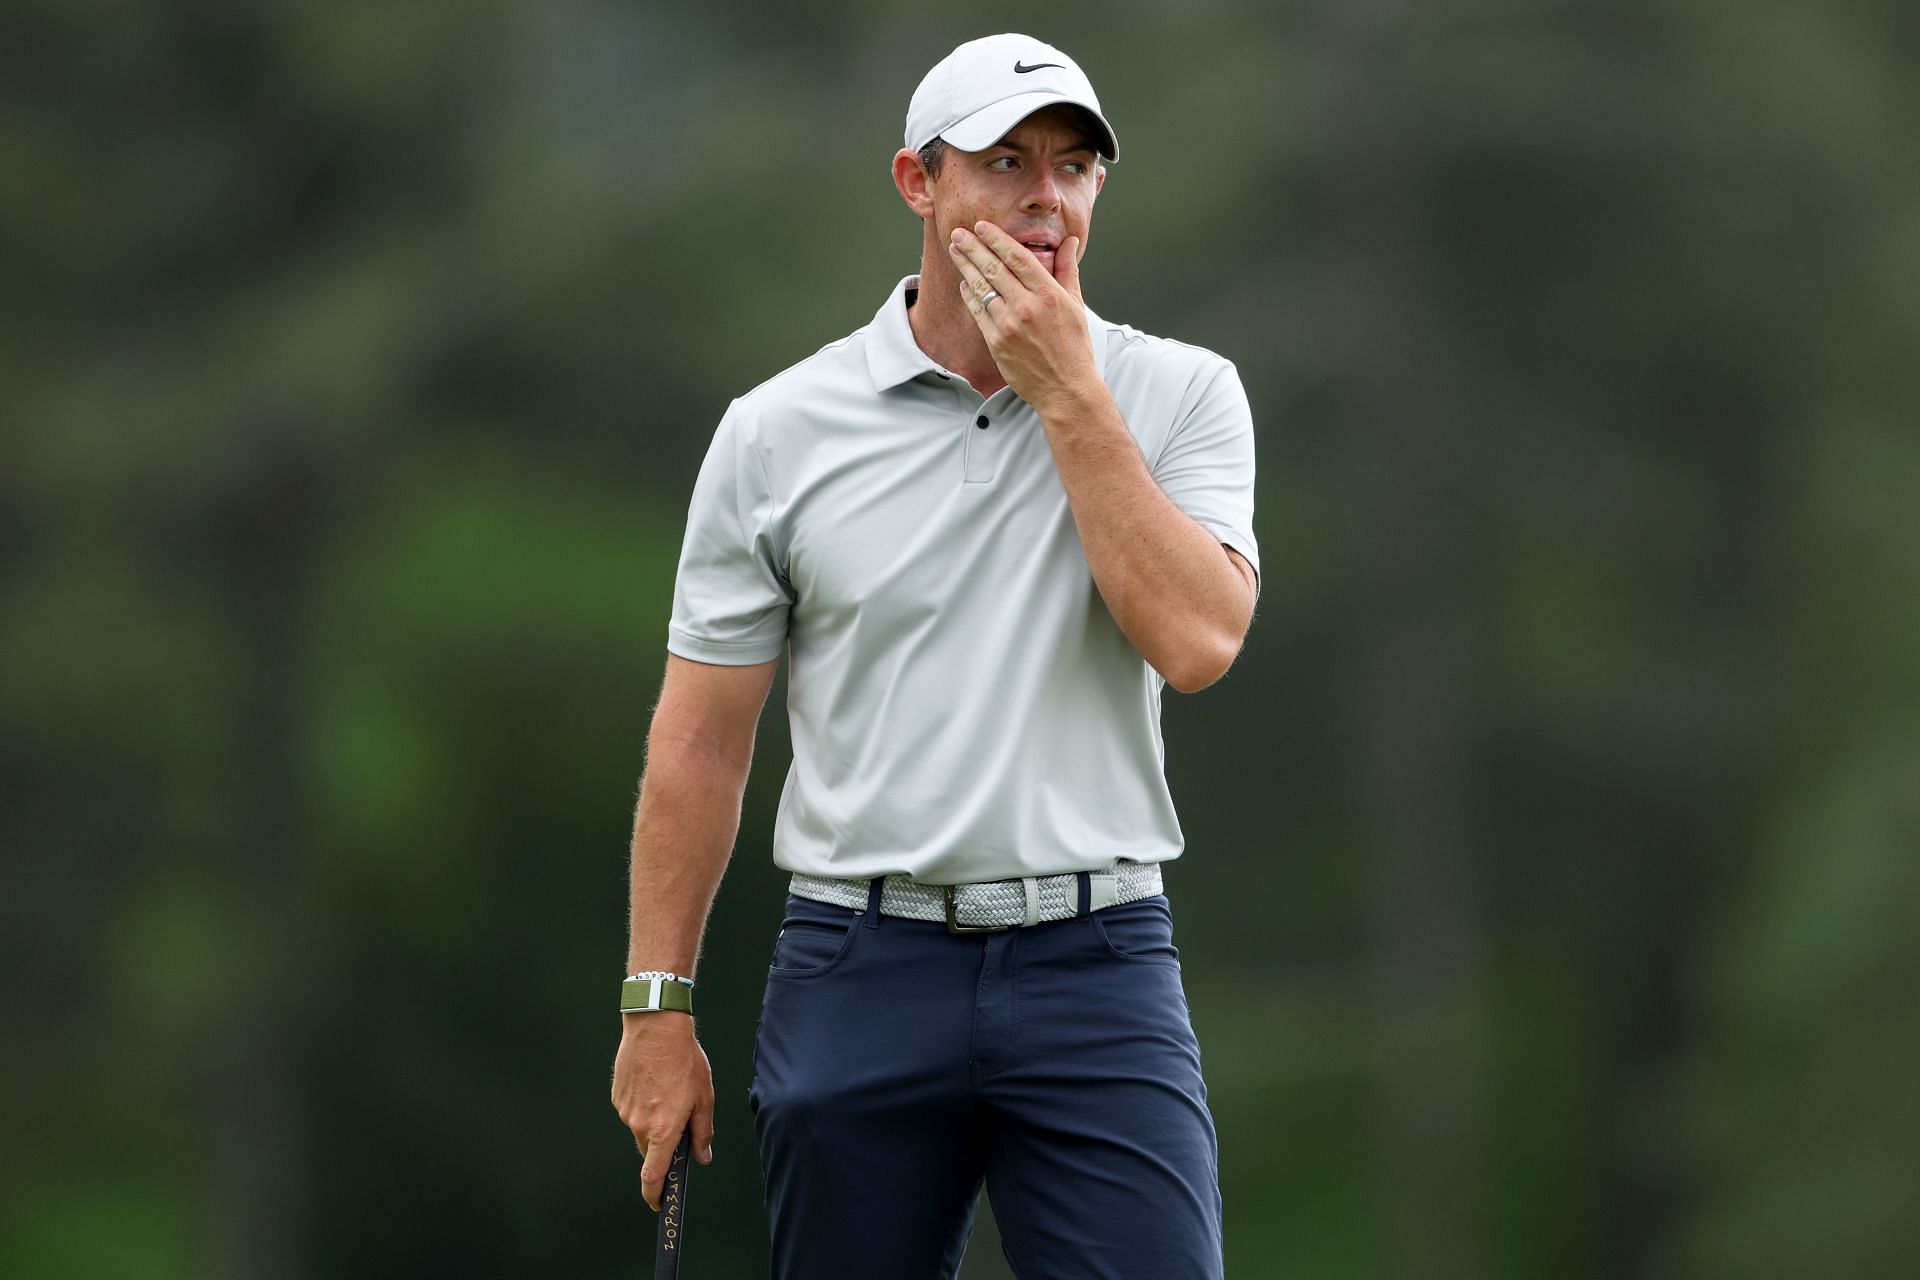 Rory McIlroy struggled at the Masters